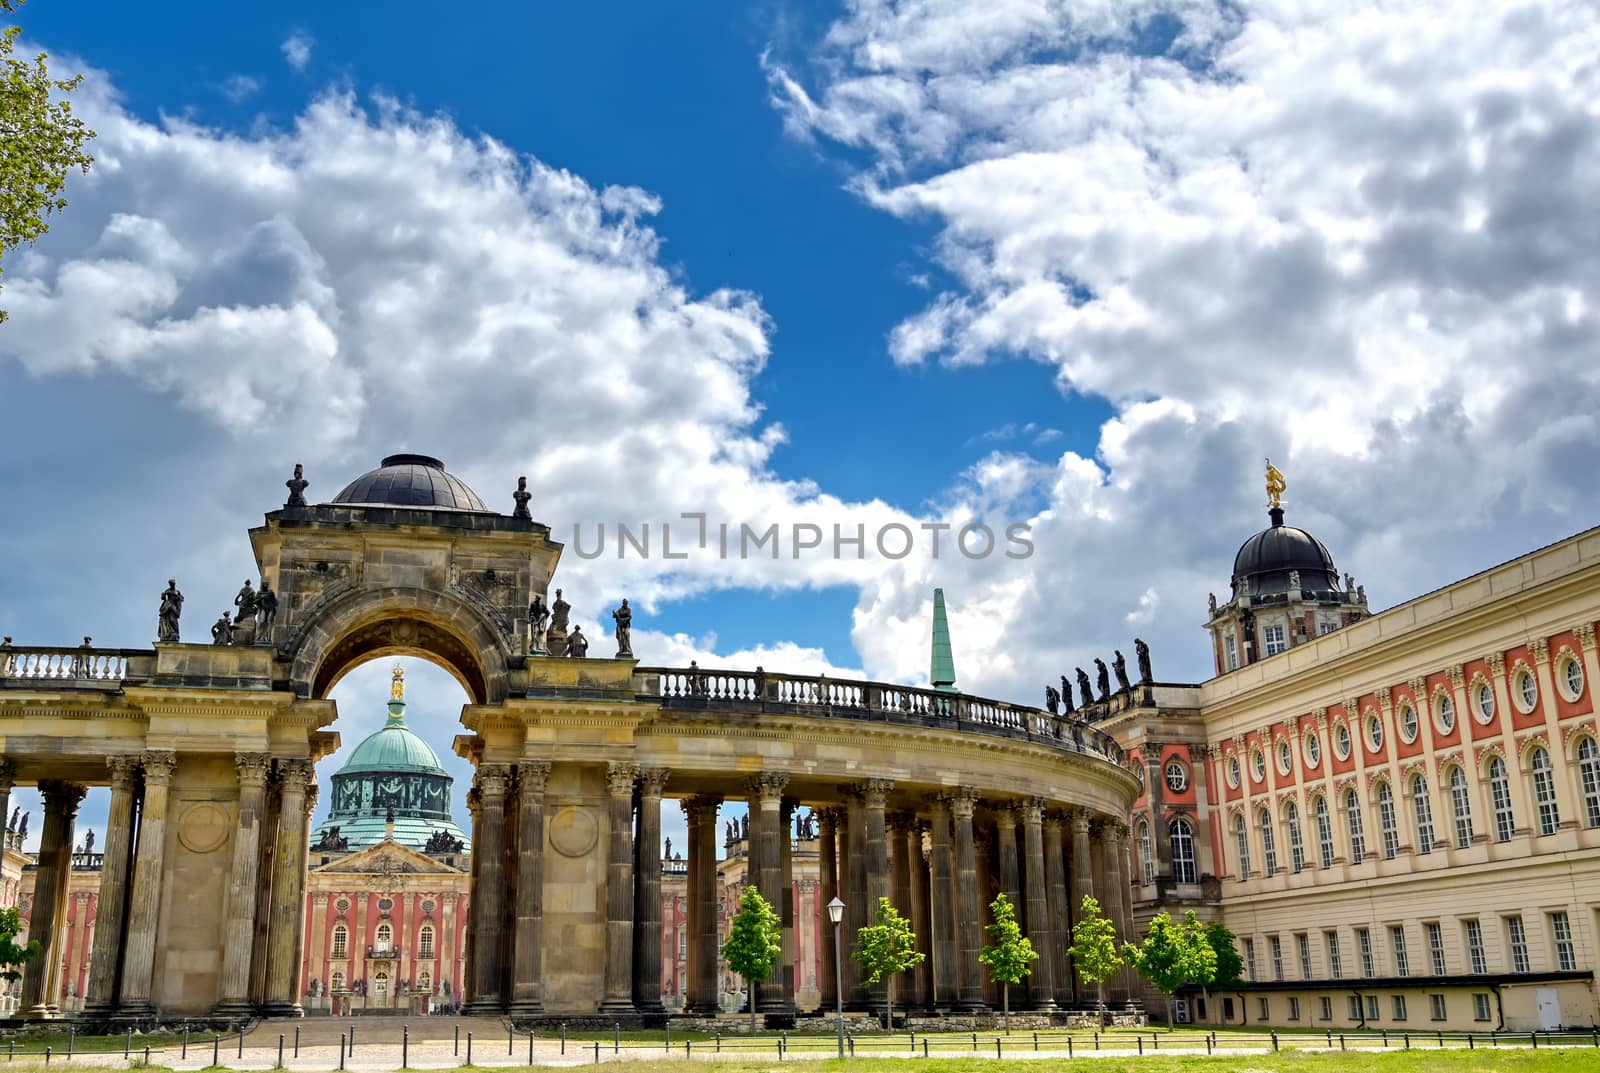 The New Palace in Potsdam, Germany by jbyard22